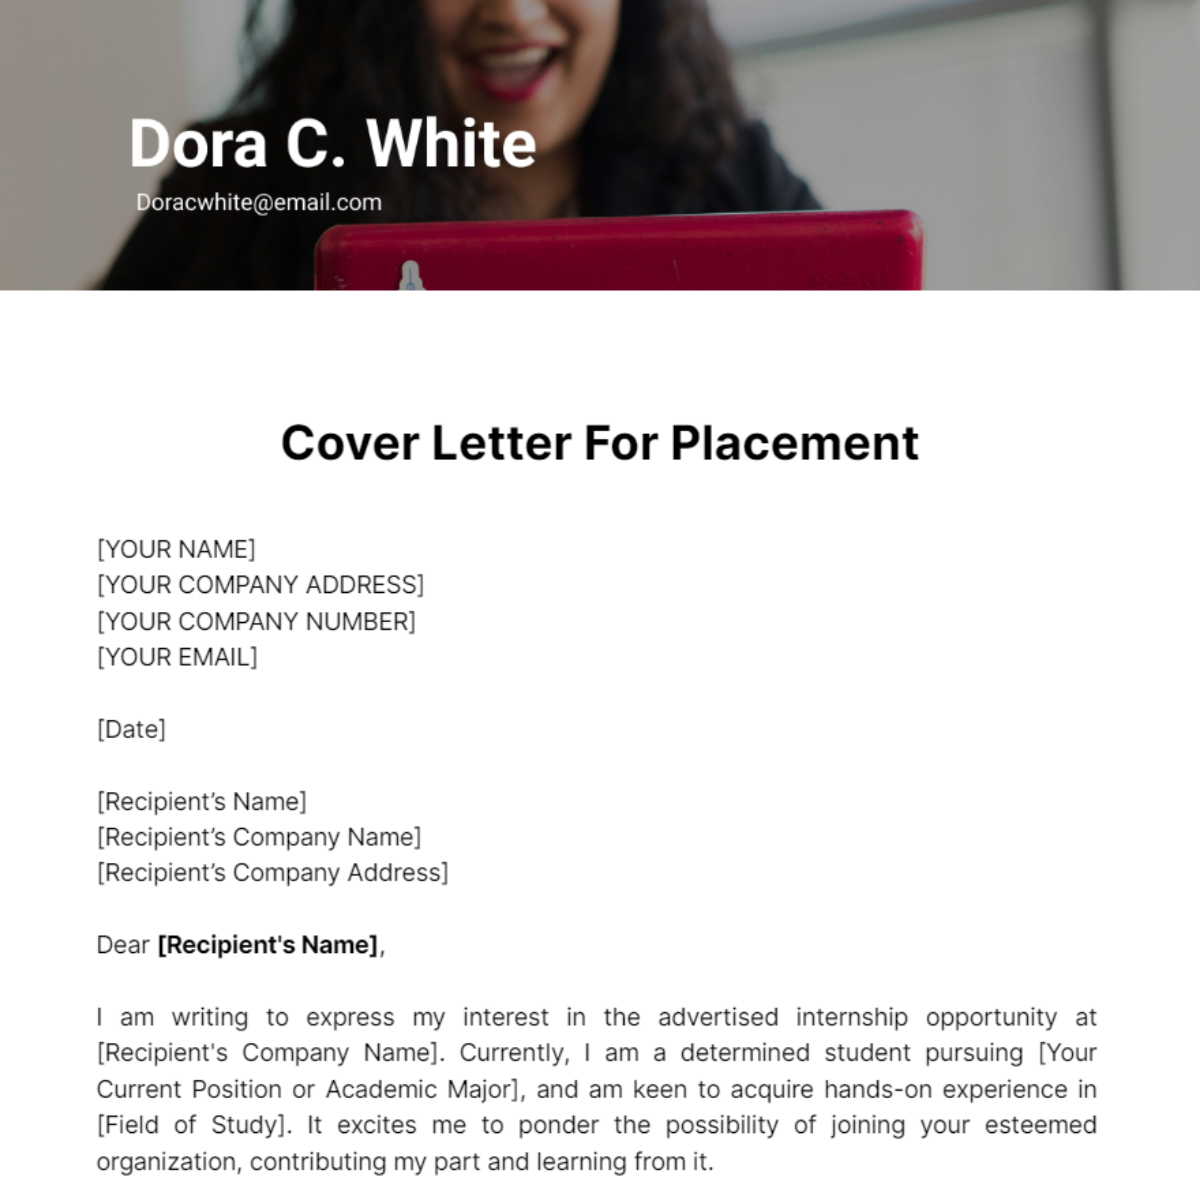 Cover Letter For Placement Template